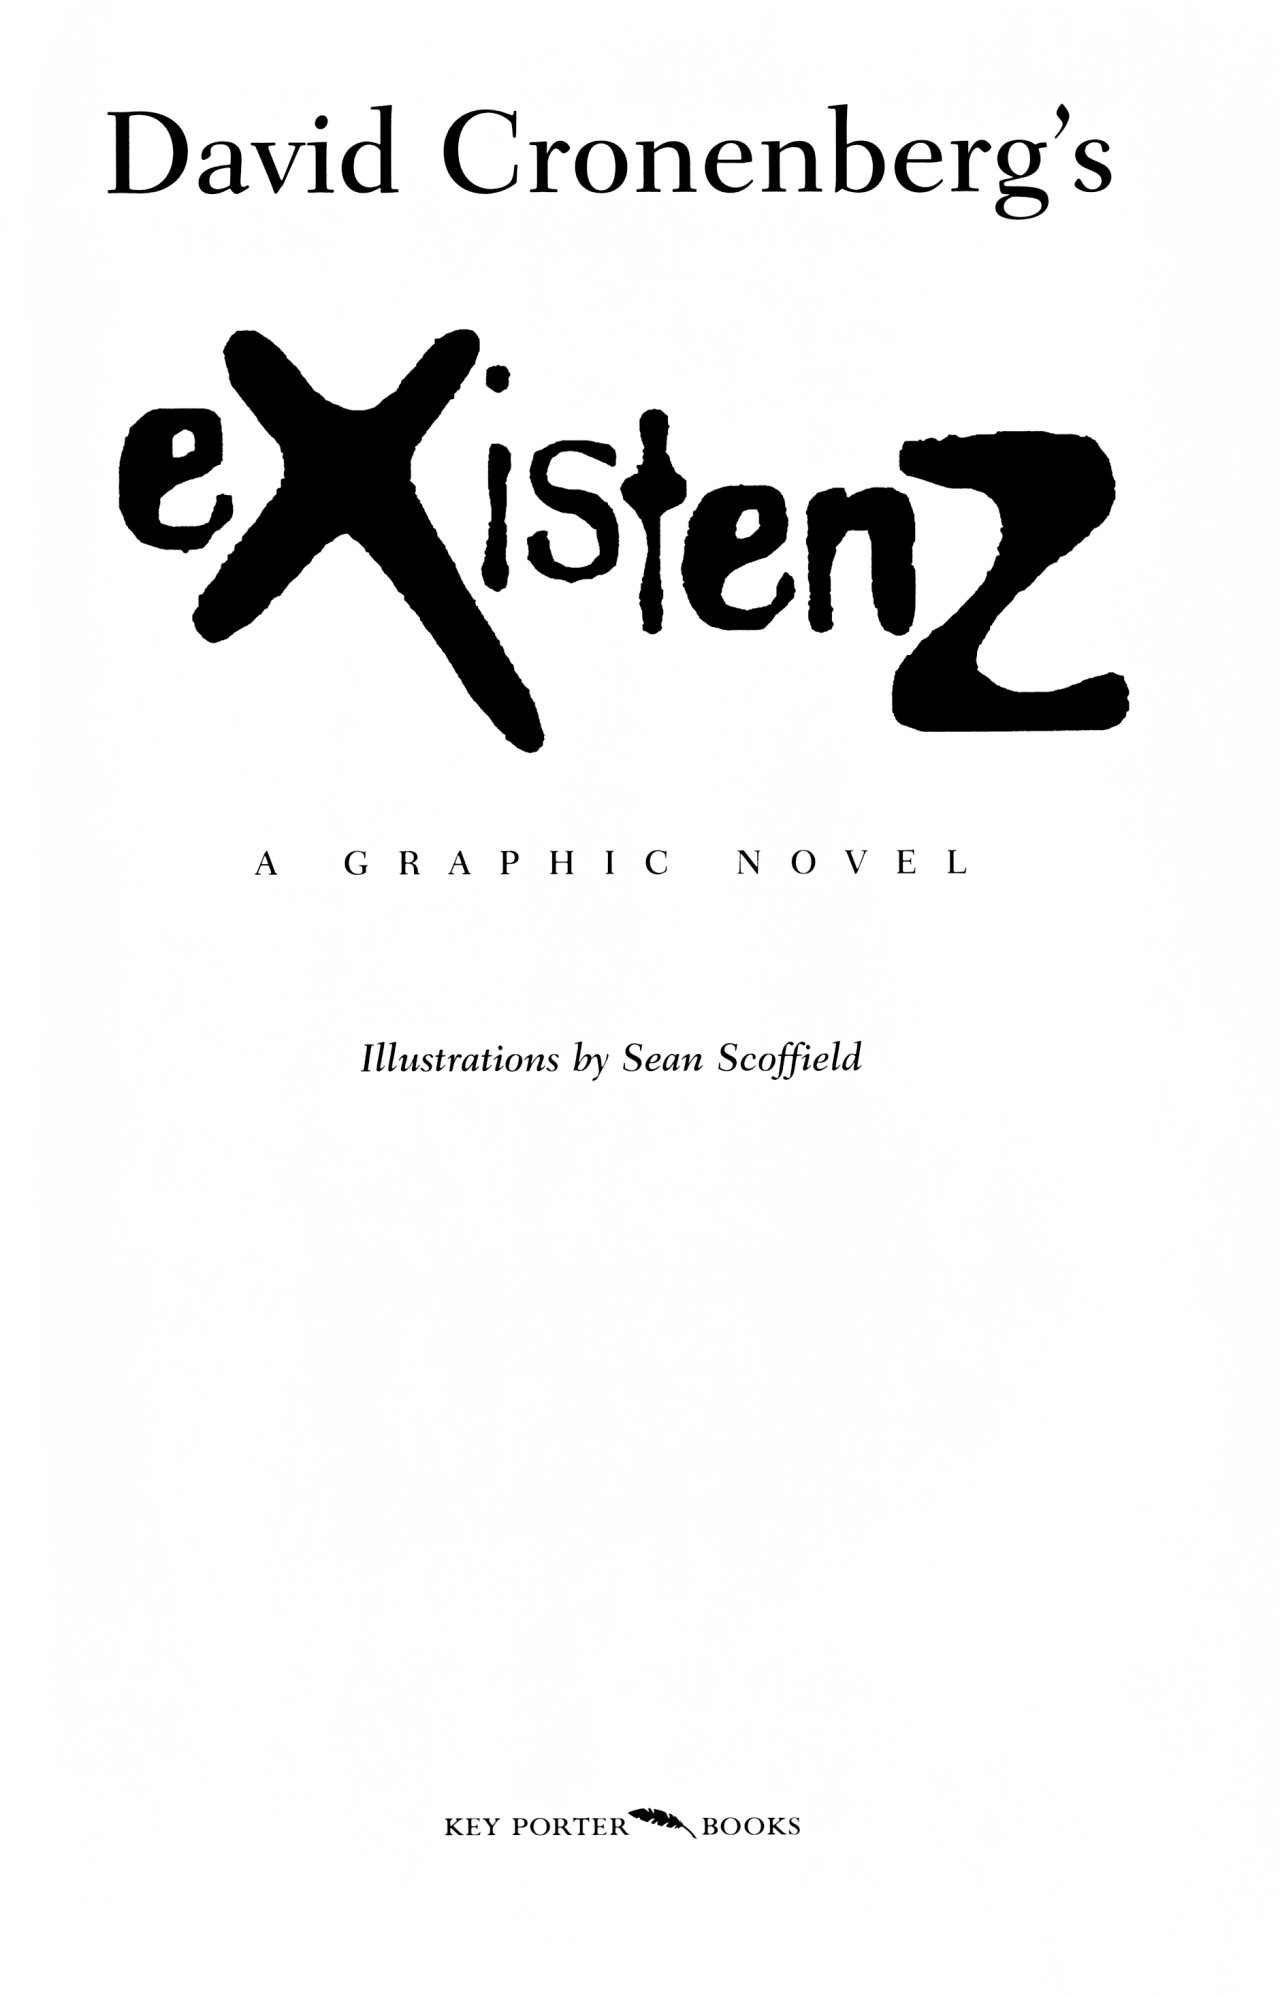 Read online eXistenZ comic -  Issue # TPB - 6